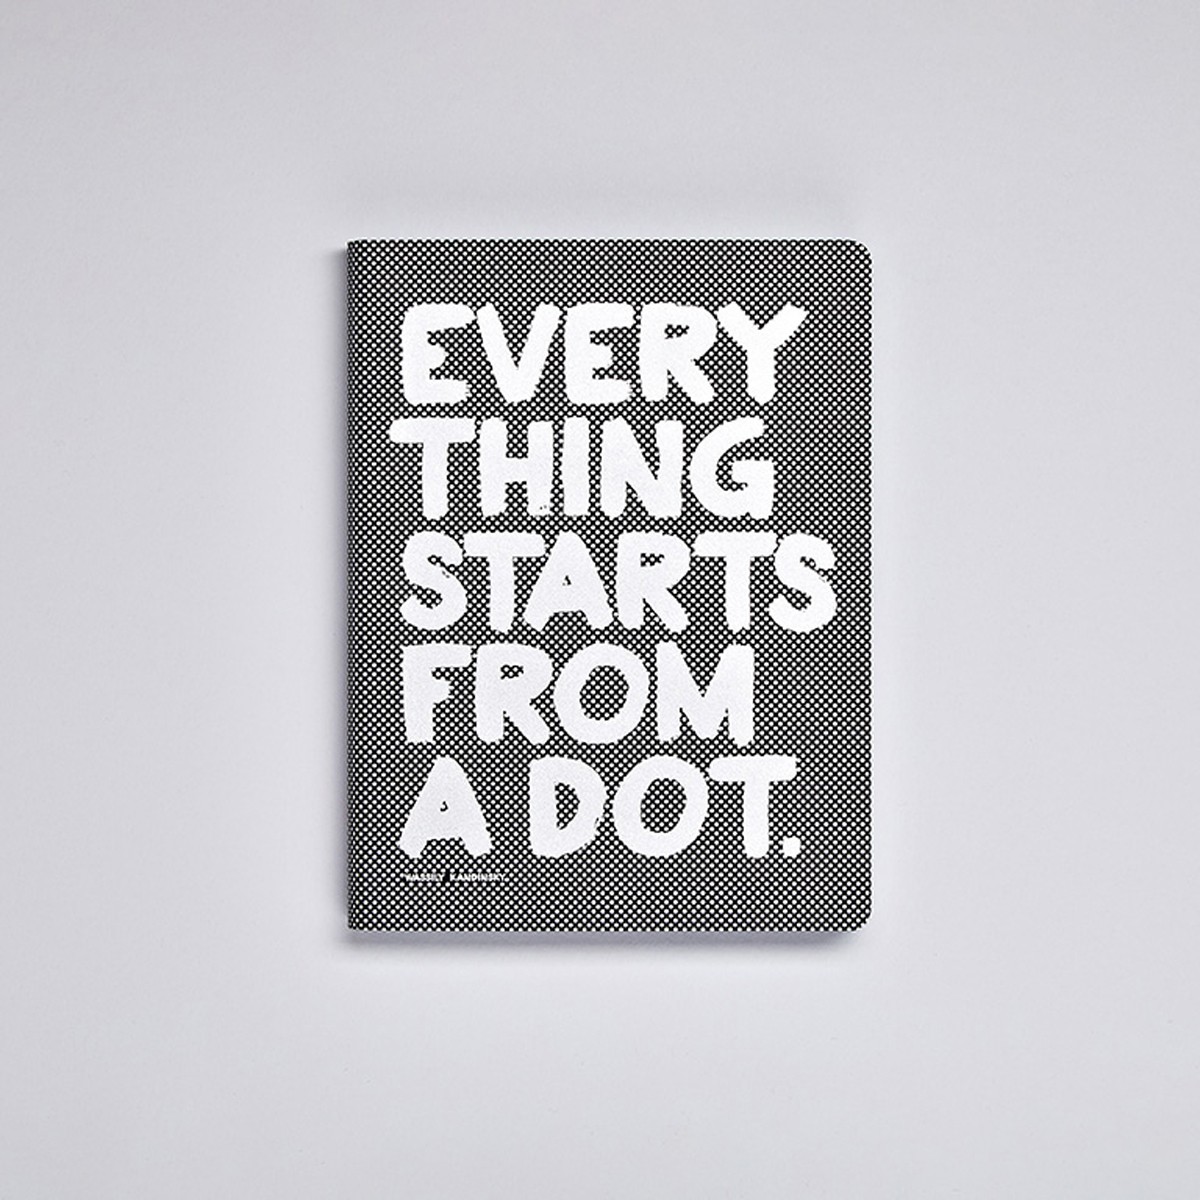 Nuuna Notebook Graphic L - EVERYTHING STARTS FROM A DOT